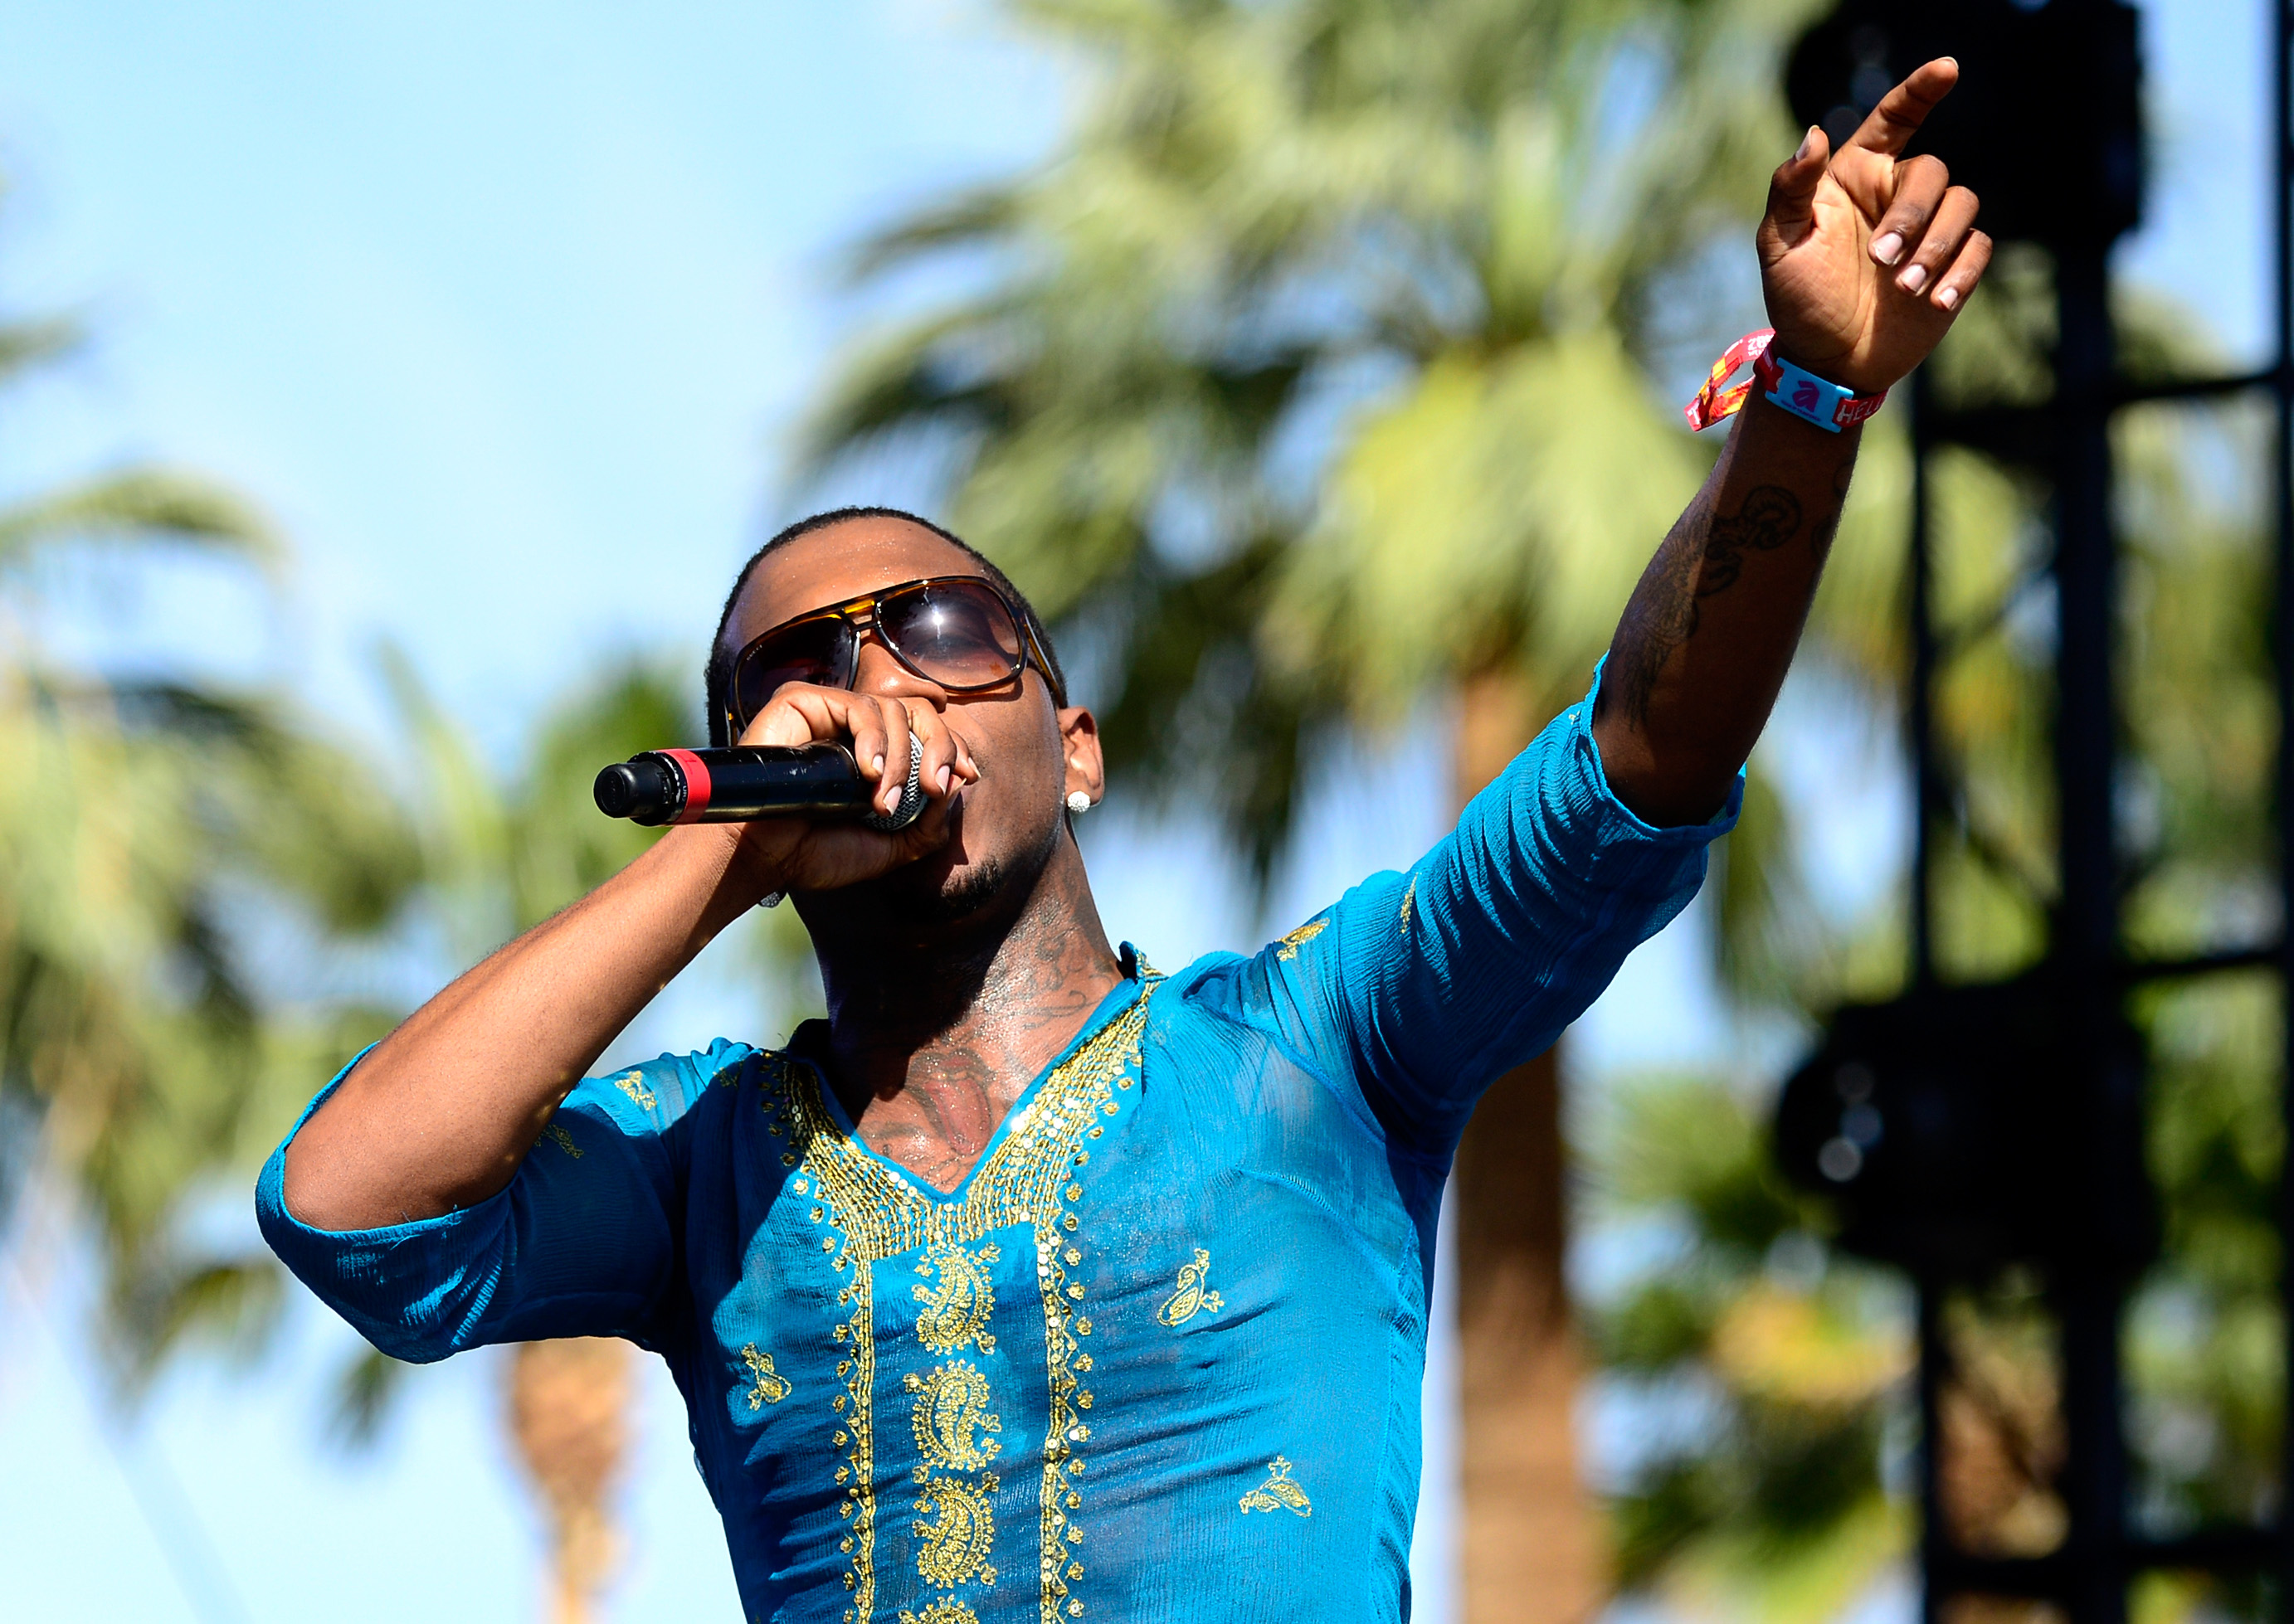 lil b releases 30 mixtapes to streaming